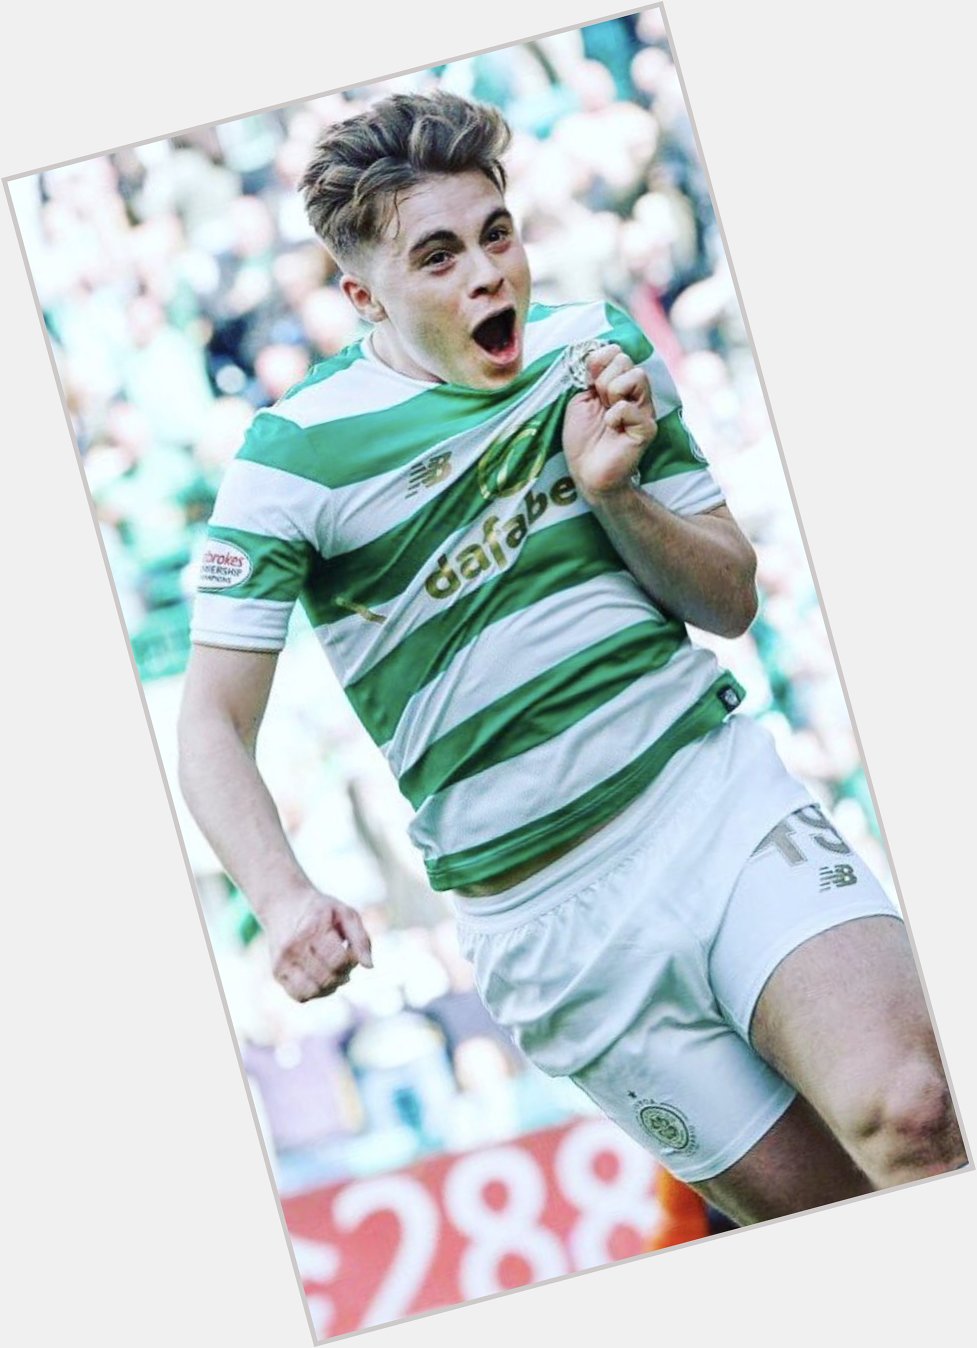 Happy birthday to the best winger in the world James Forrest CSC 